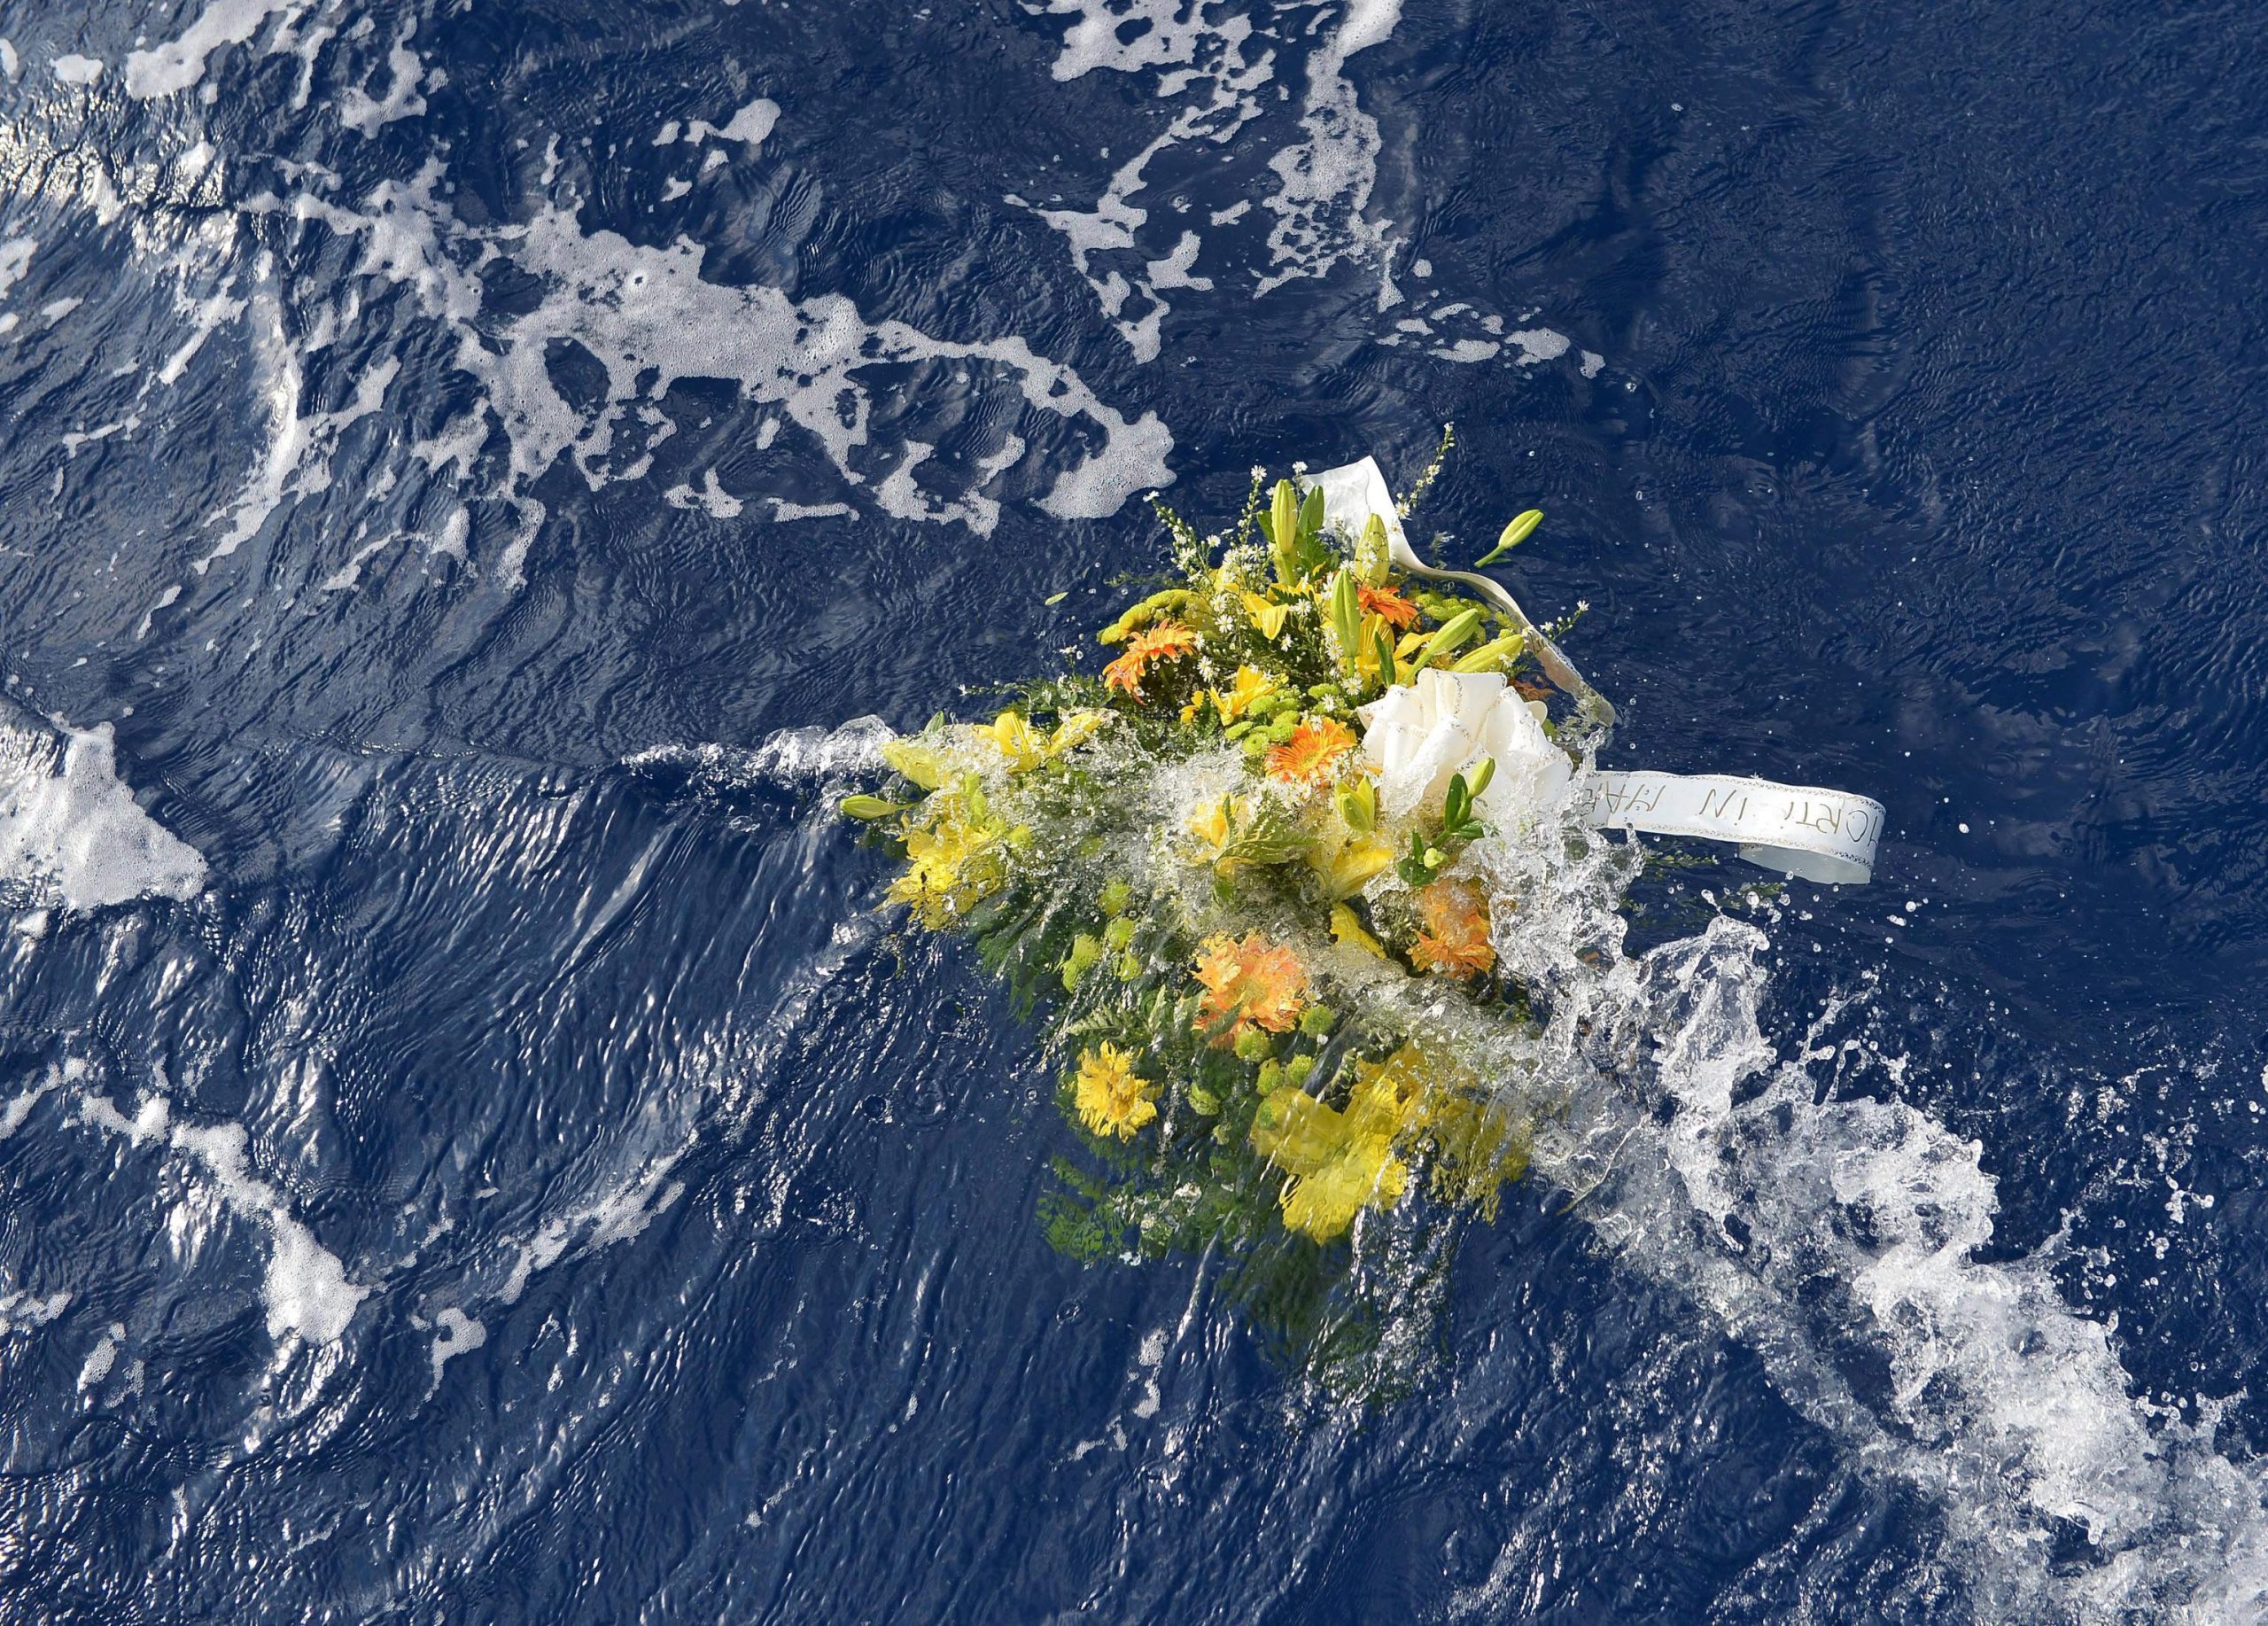 Lampedusa: flowers in the shipwreck site